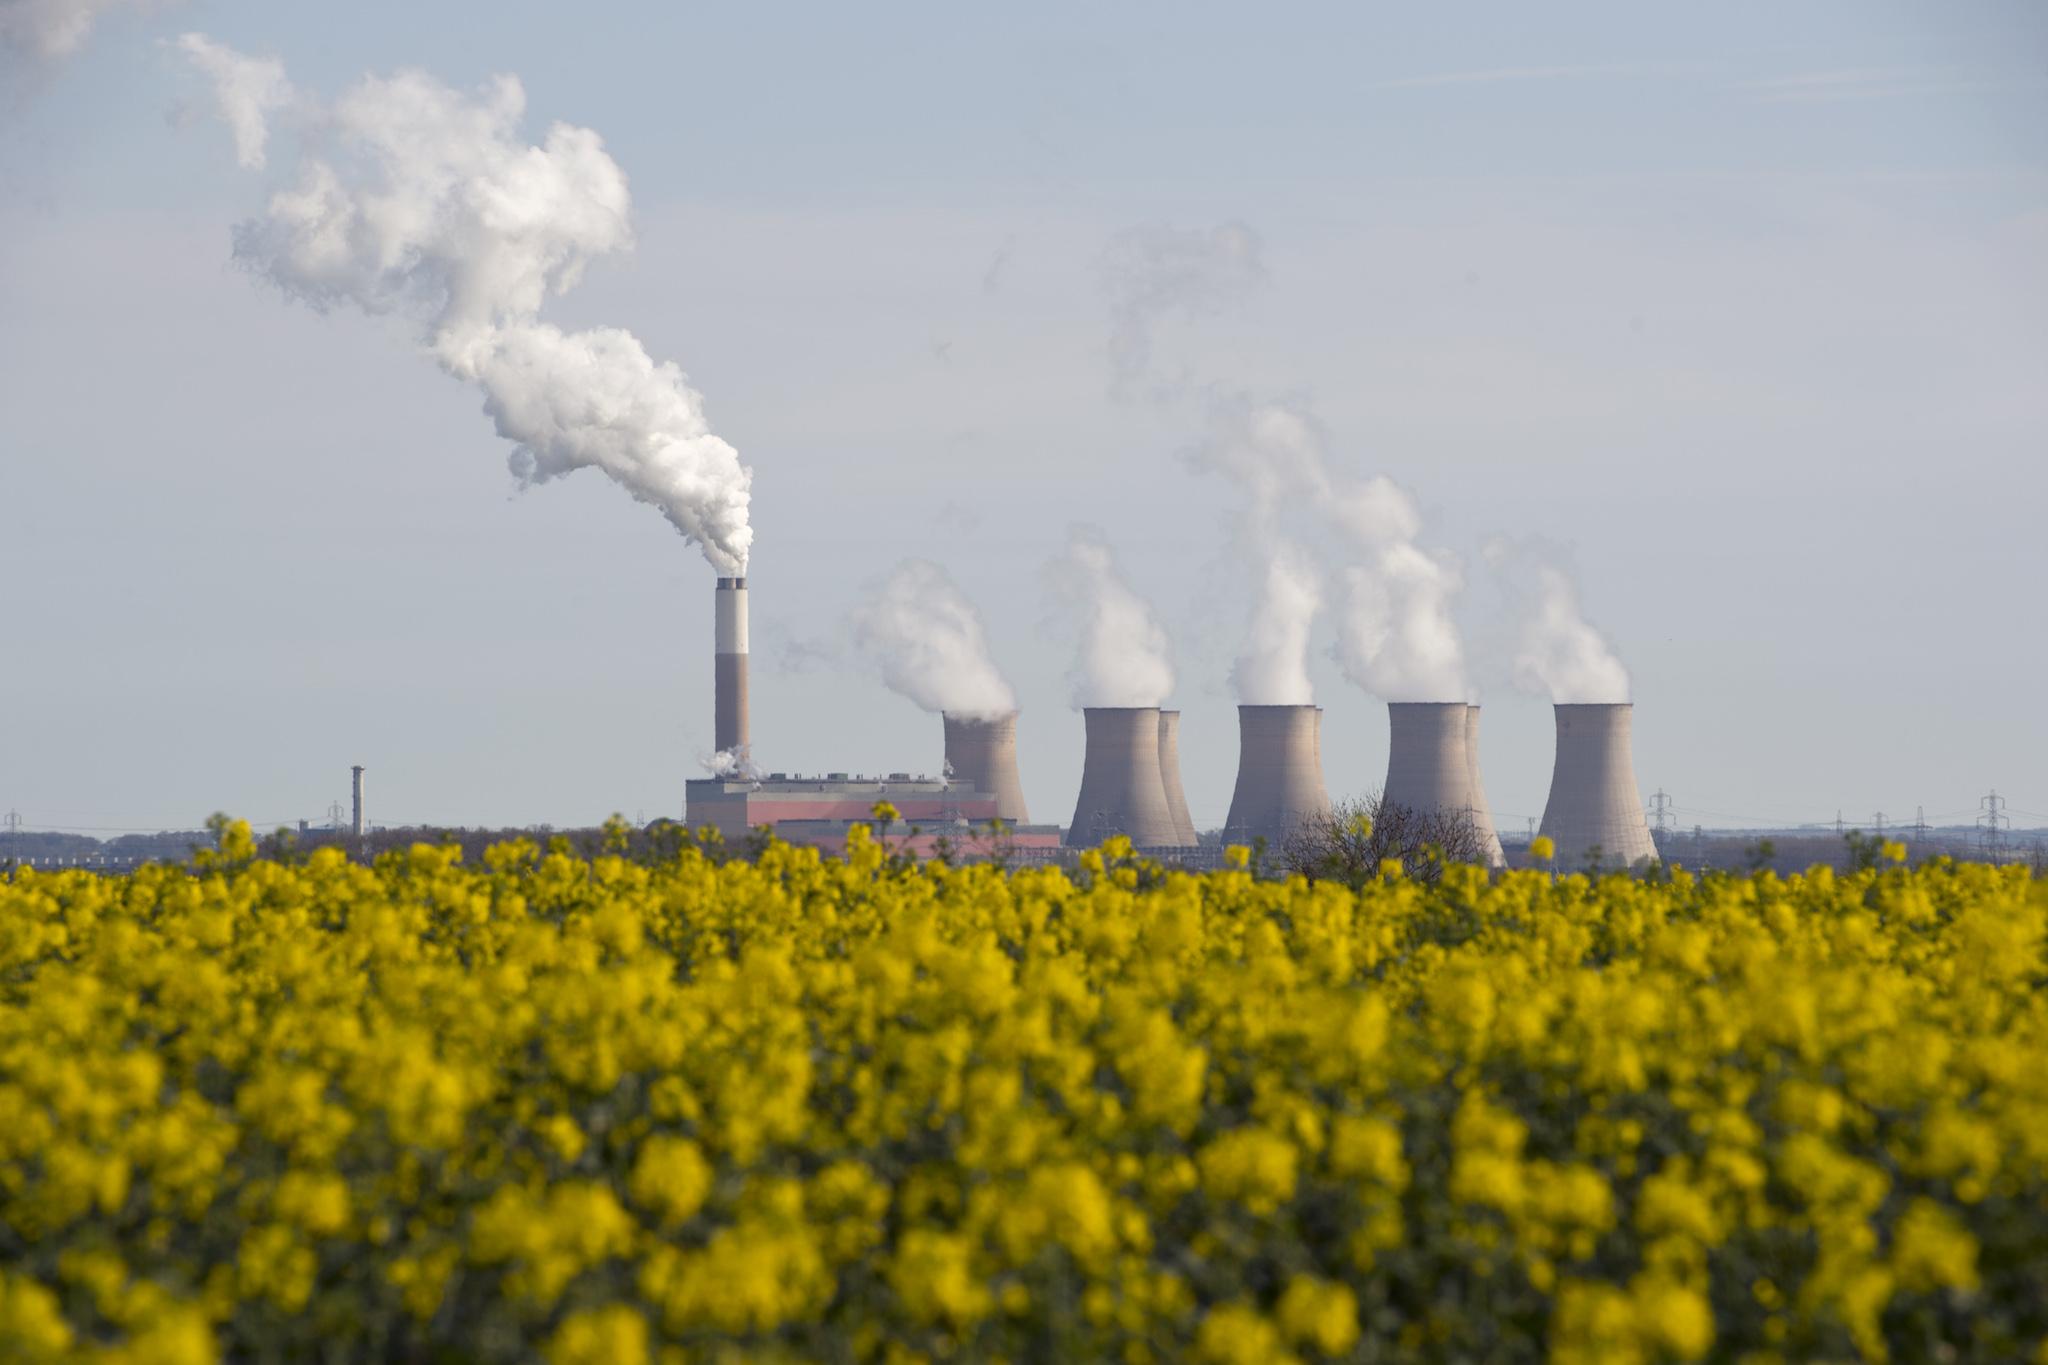 Smoke rises from the cooling towers of Cottam coal-fired power station, near Darlton, Nottinghamshire